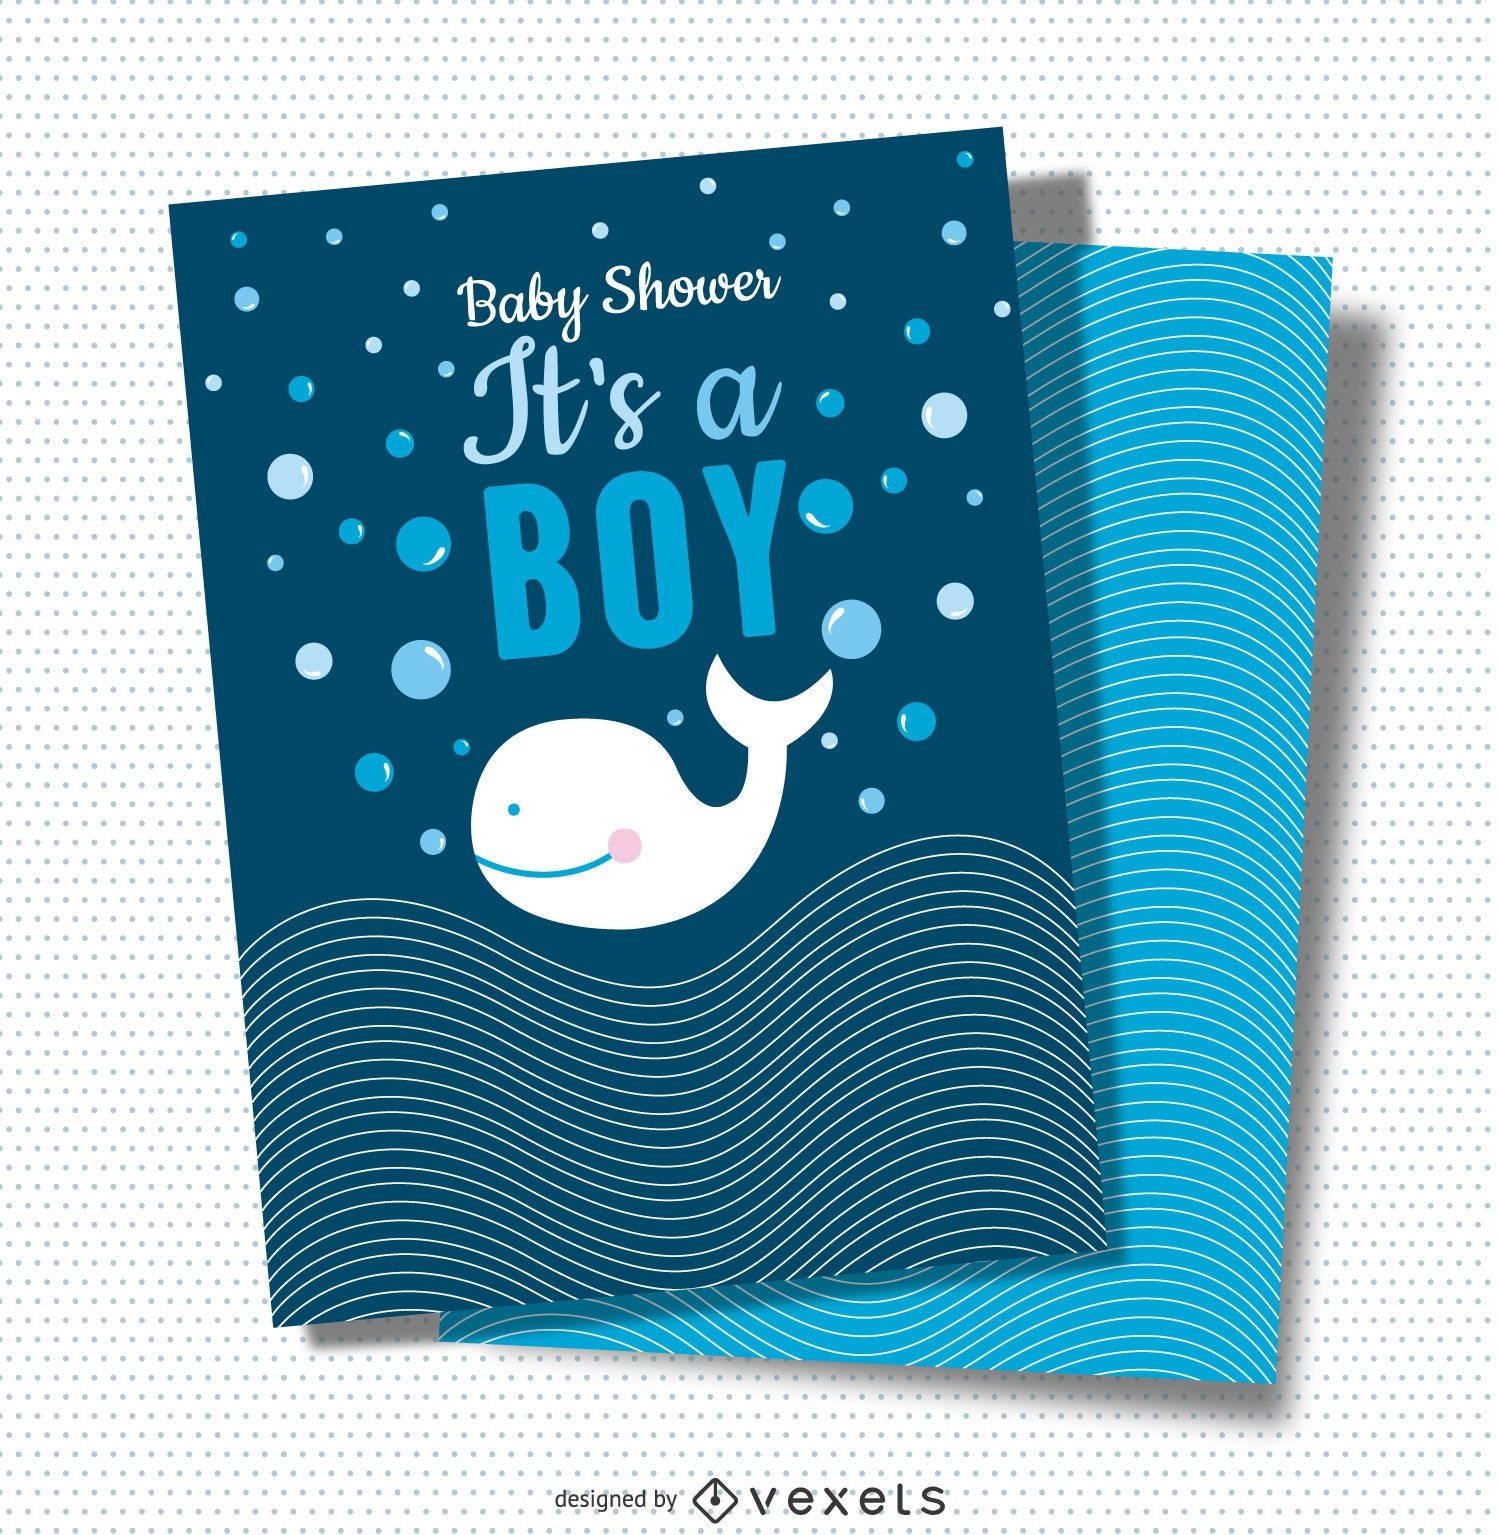 it-s-a-boy-baby-shower-card-vector-download